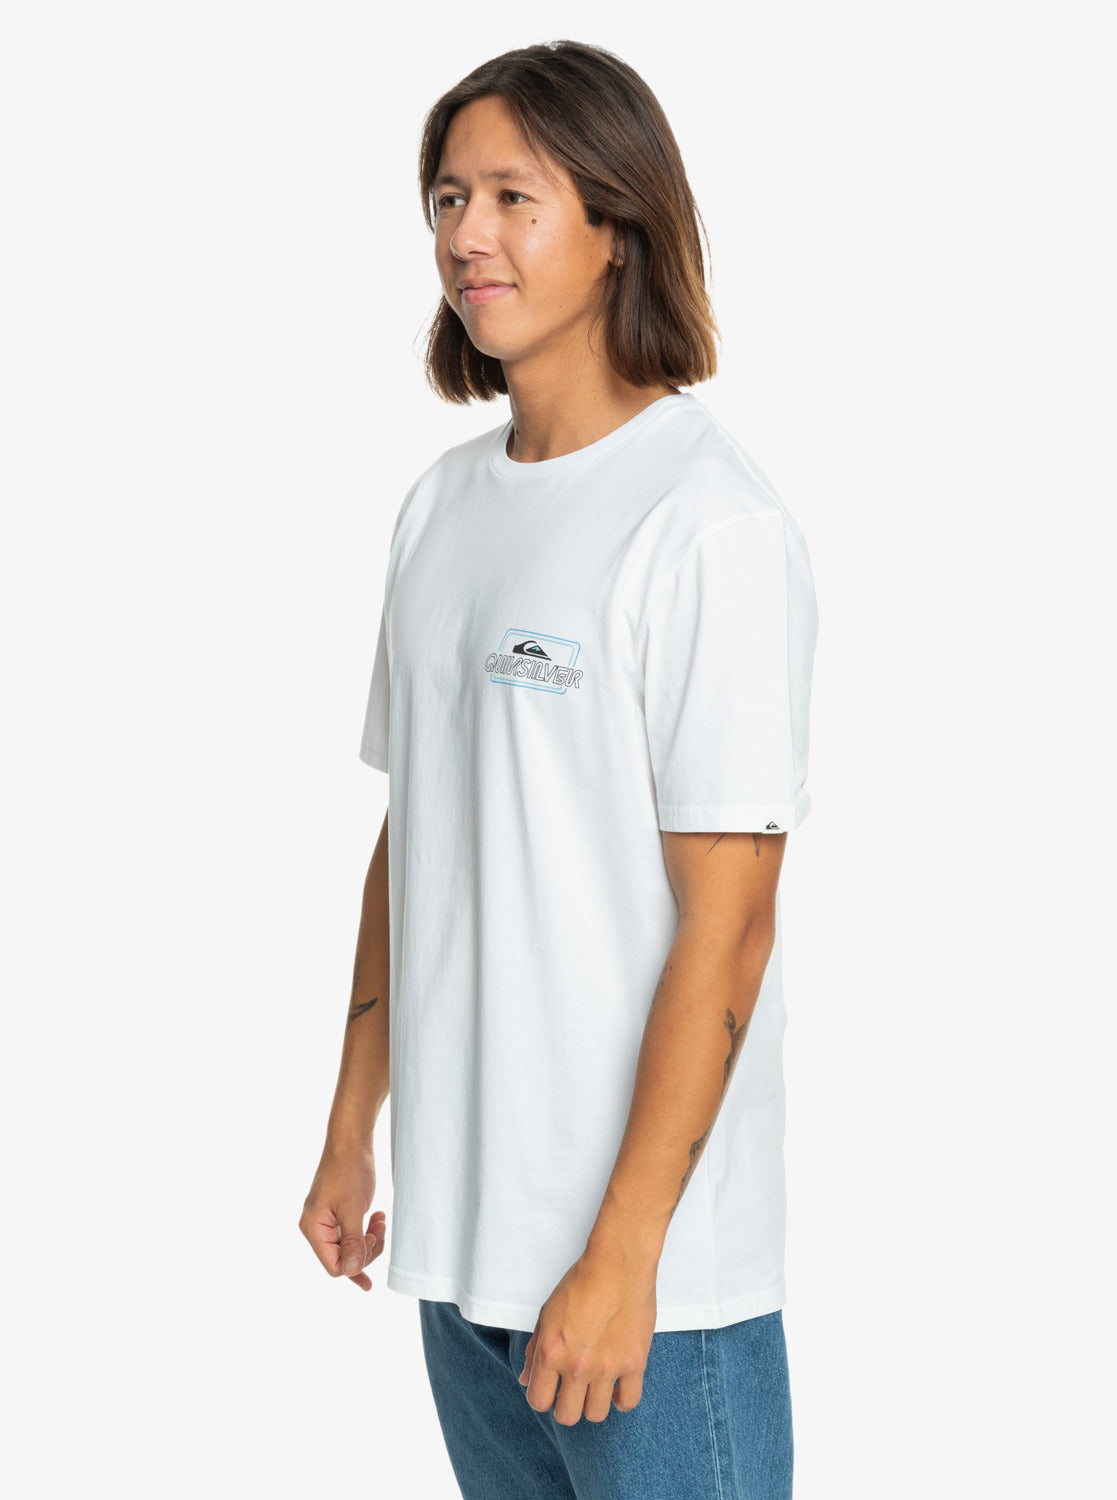 Quicksilver Line By Line - T-Shirt - White